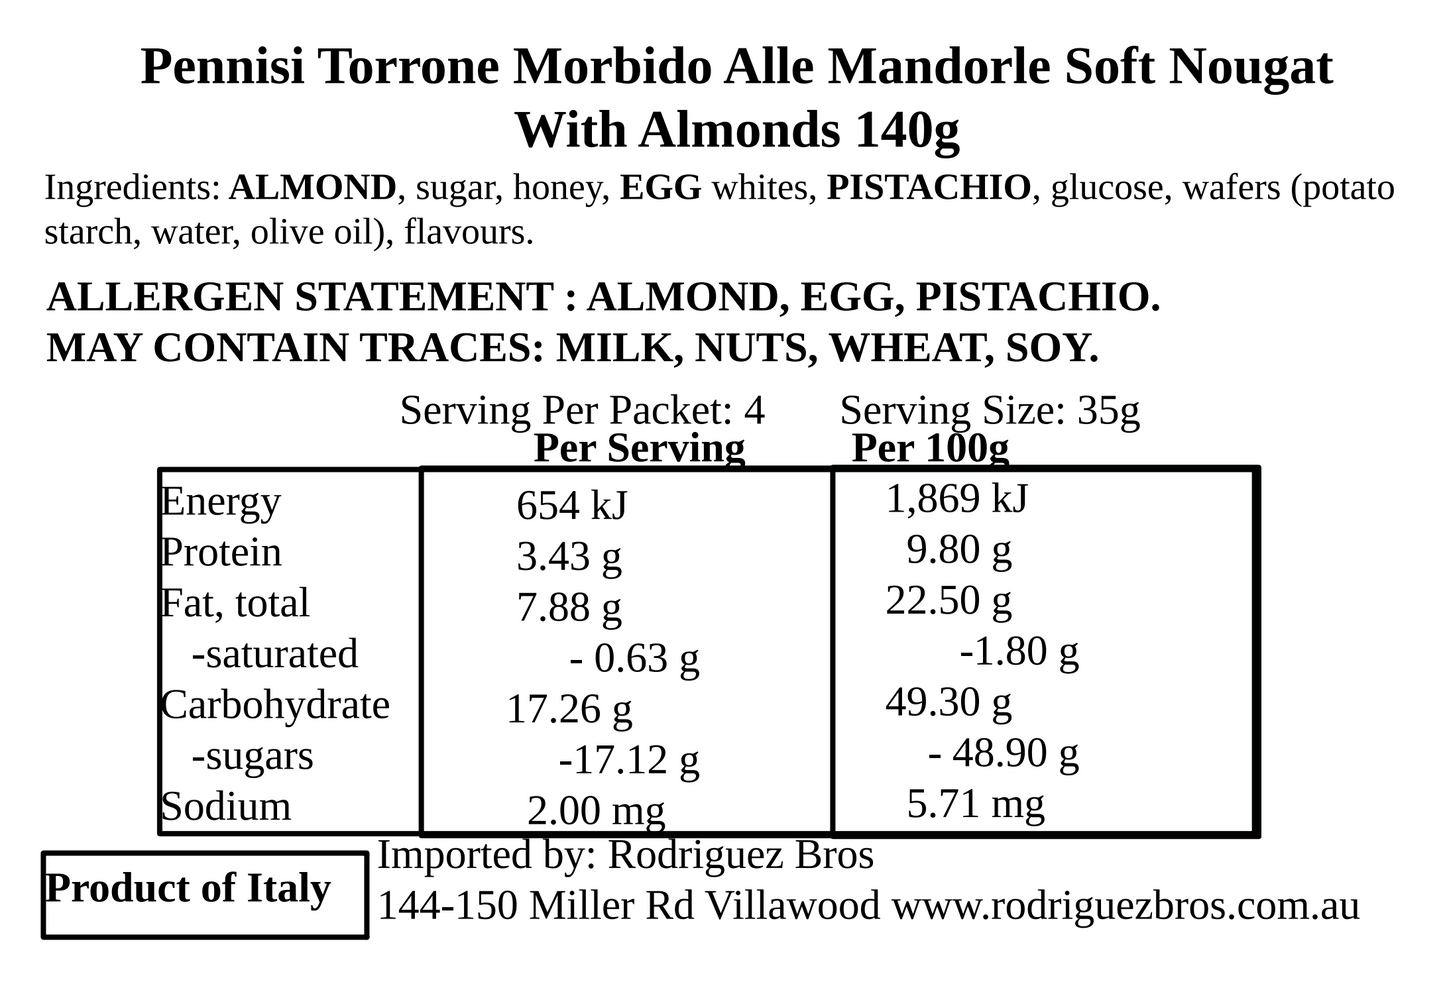 Pennisi Torrone Morbido Alle Mandorle Soft Nougat With Almonds 2 Pack 140g x2